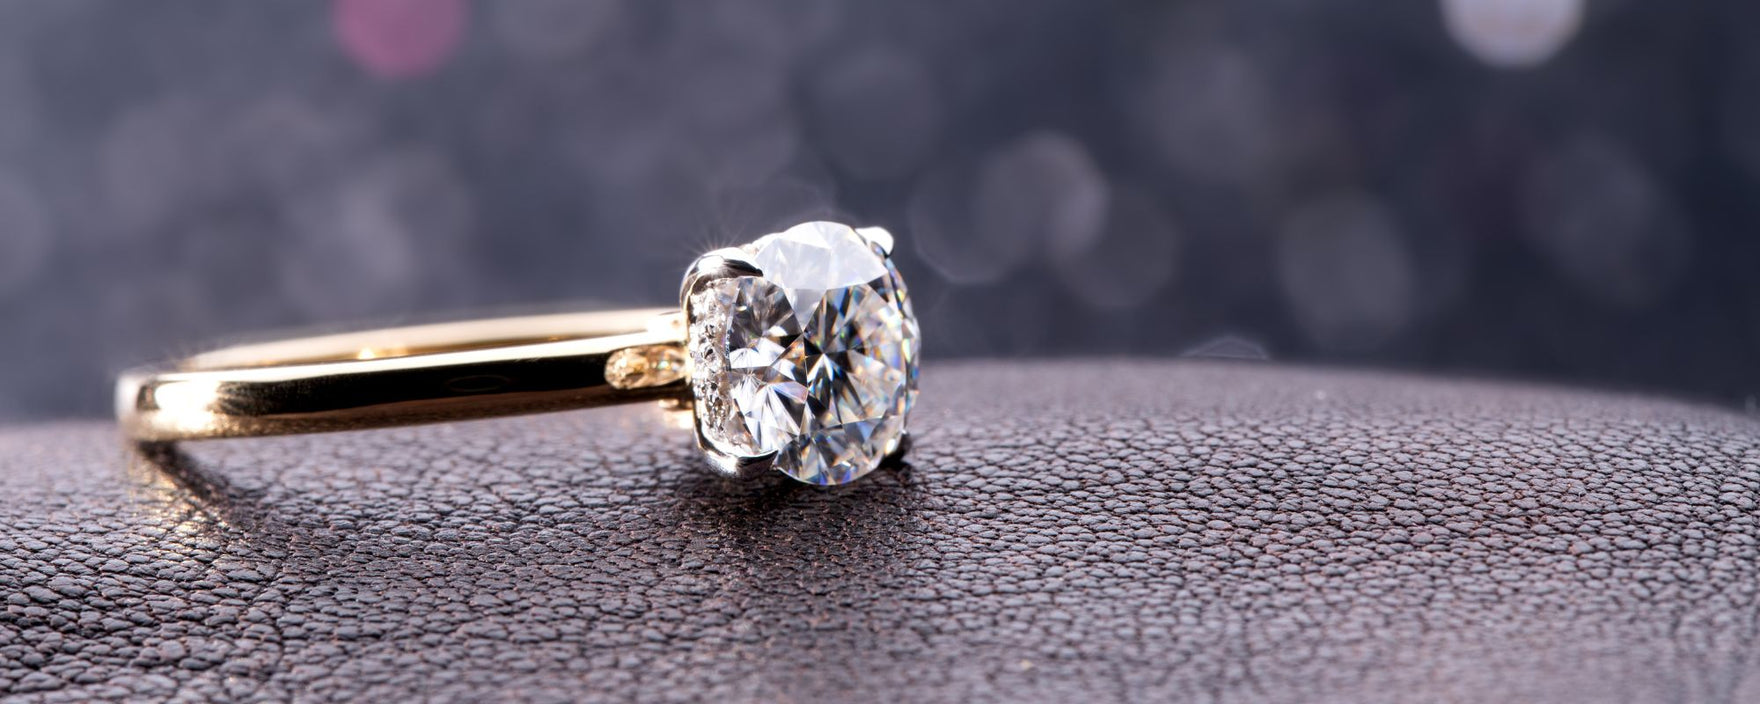 What Determines The Price Of a Diamond?